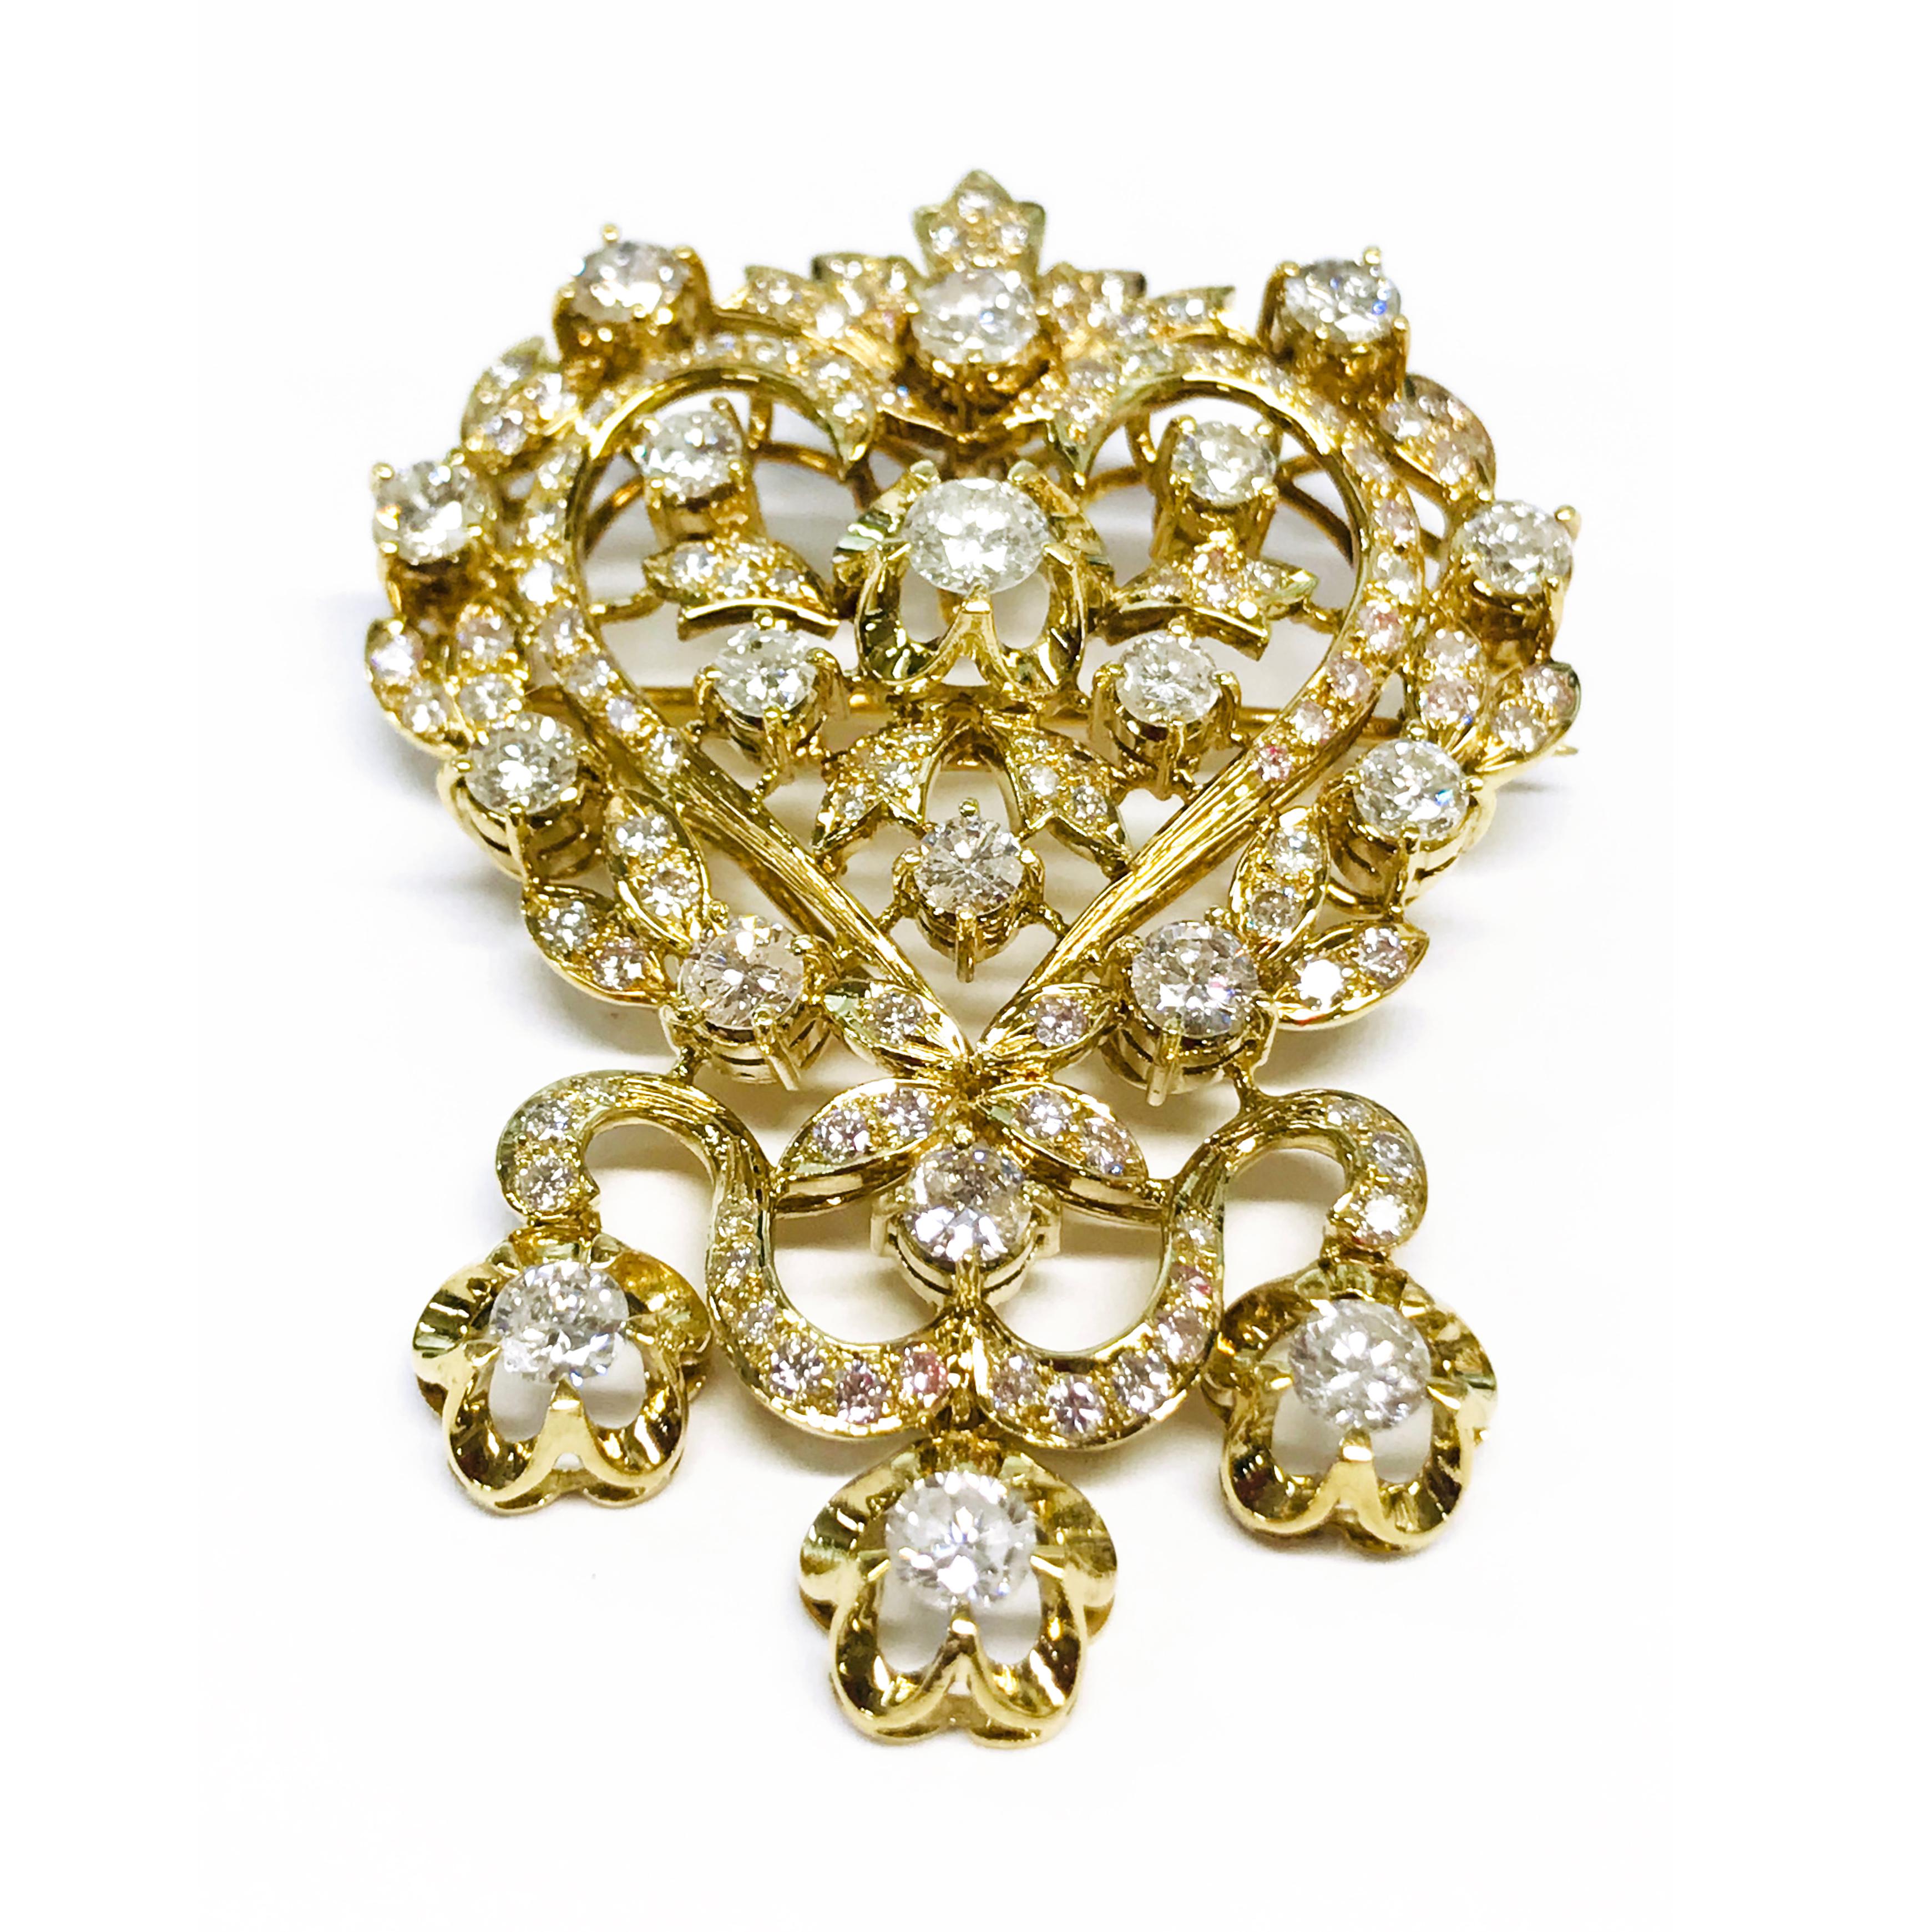 18 Karat Edwardian Diamond Brooch Enhancer Pendant. Fantastic brooch with a center ribbon forming a heart, leaves and flower details masterfully crafted. One round 4.04mm diamond for a total weight of 0.23ct. Four round 3.6mm diamond for a total